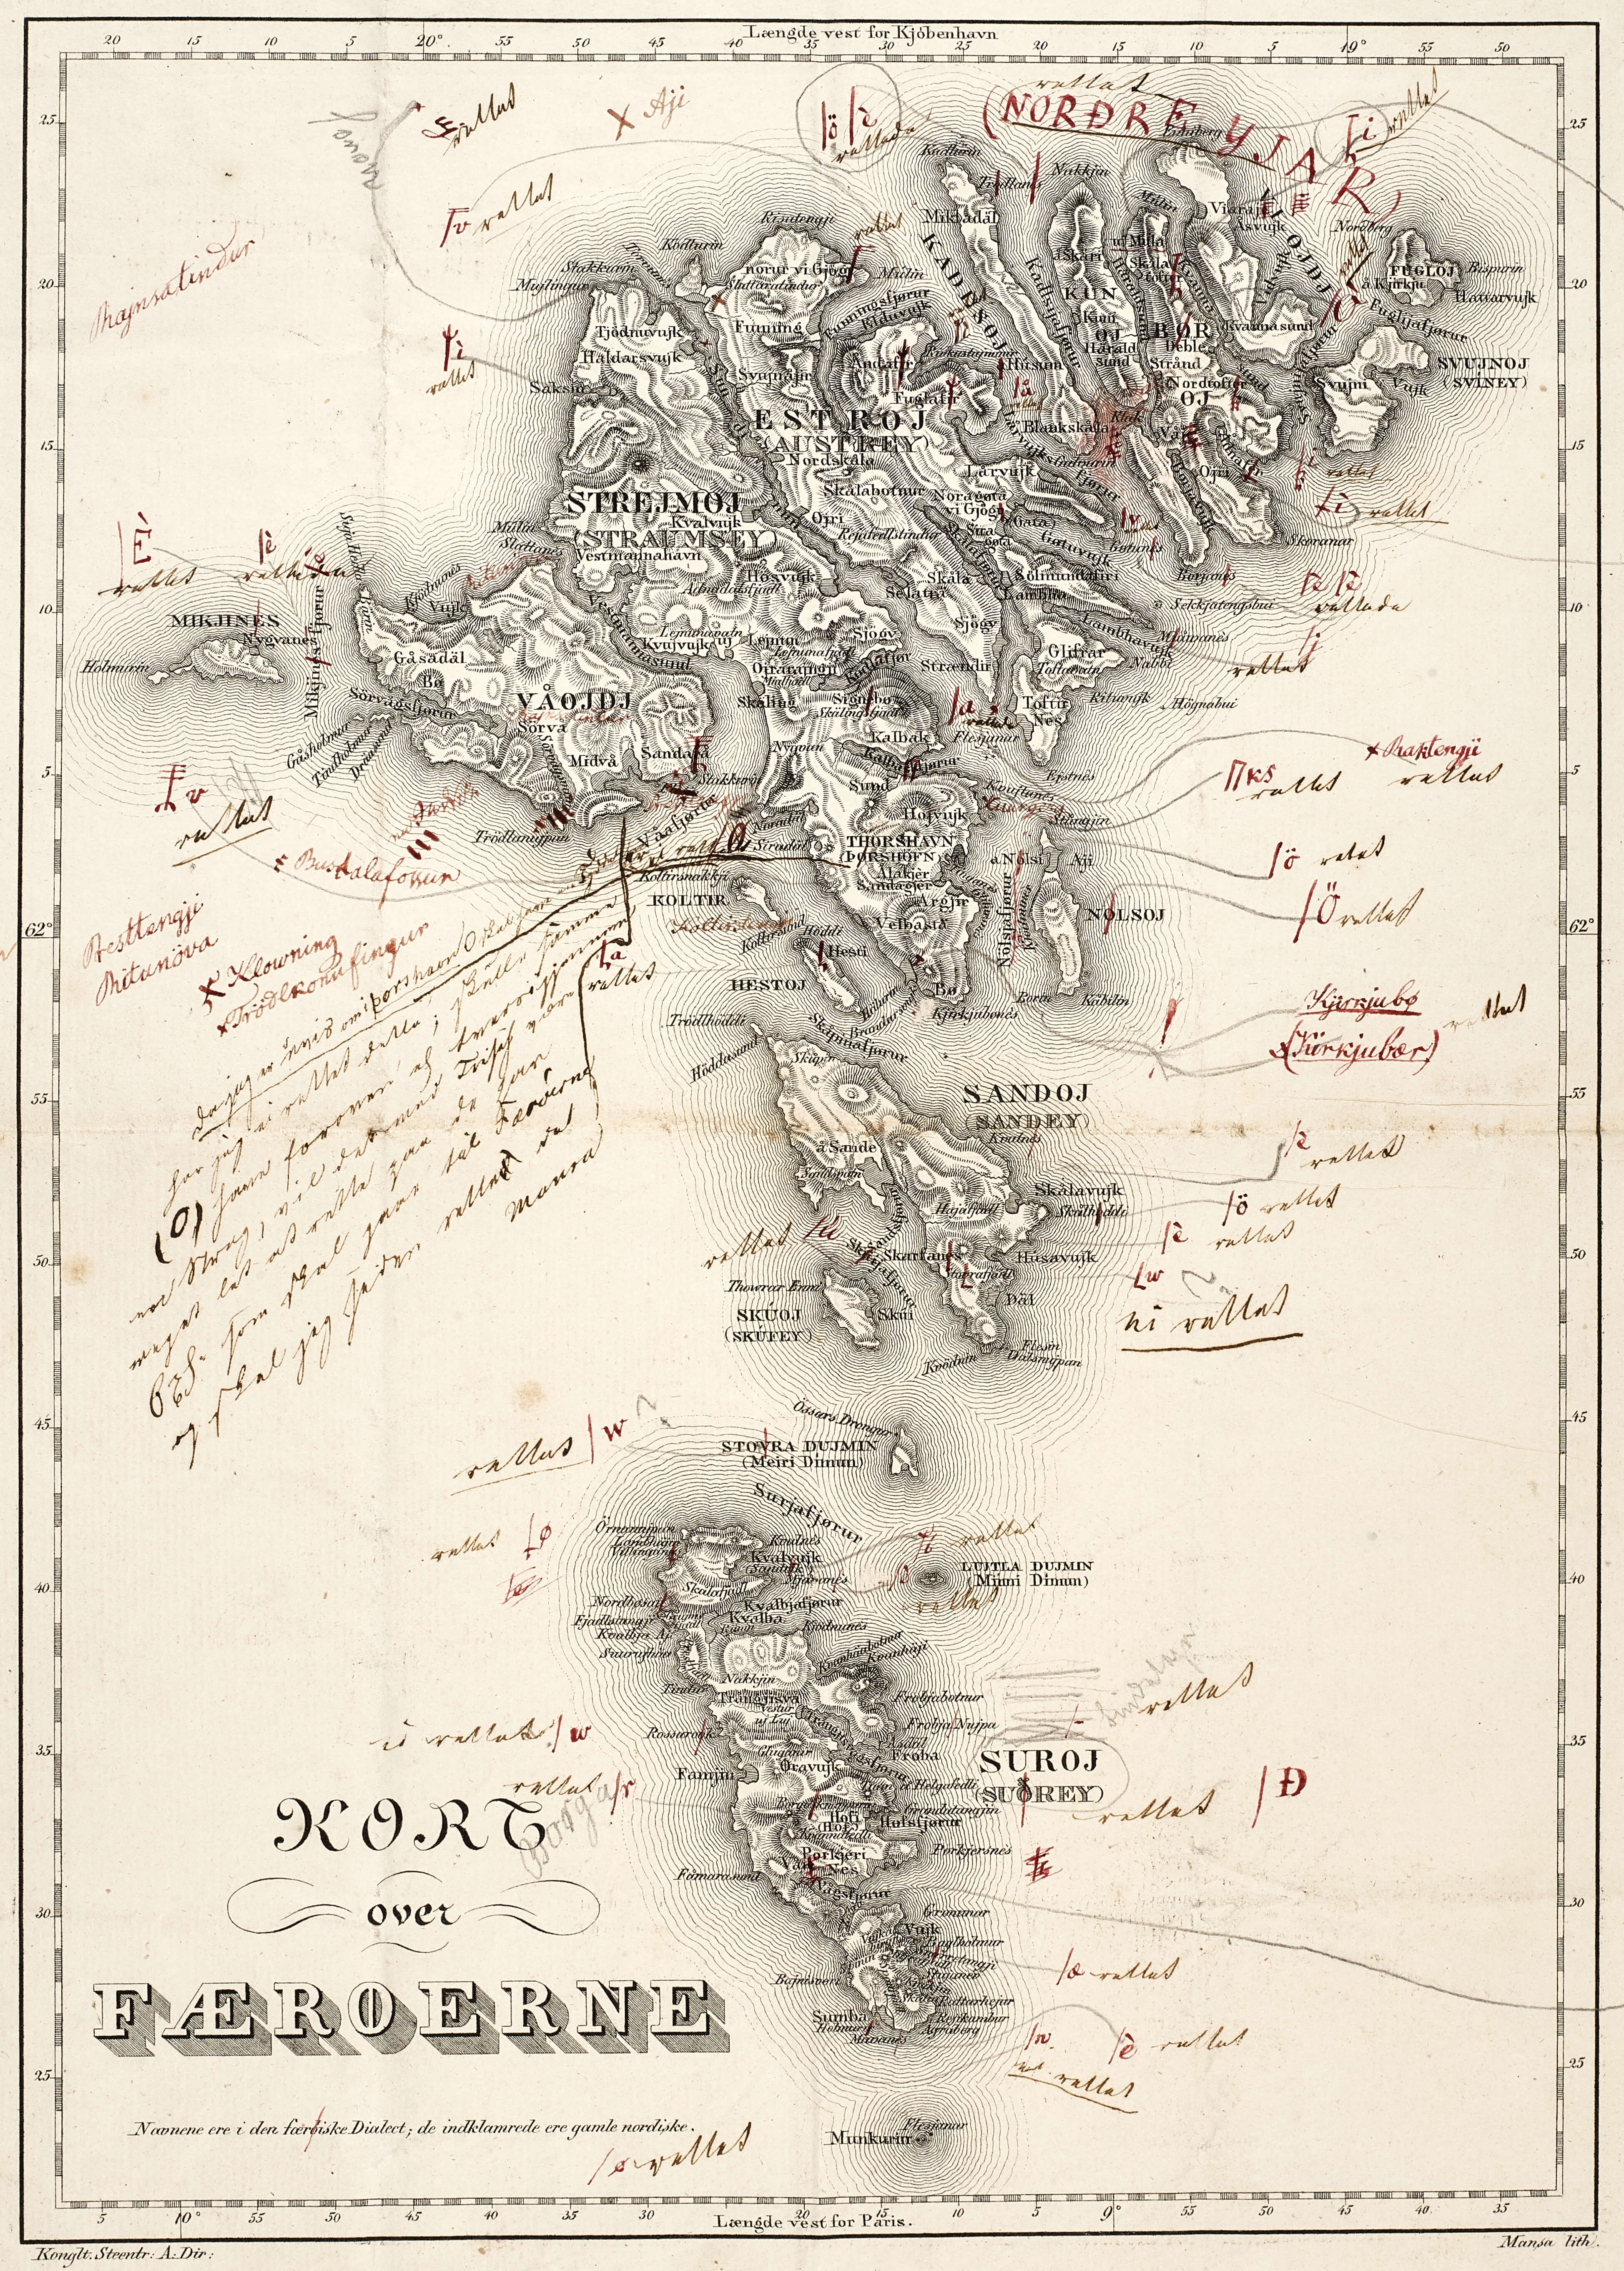 Printed map of the Faroe Islands with handwritten corrections